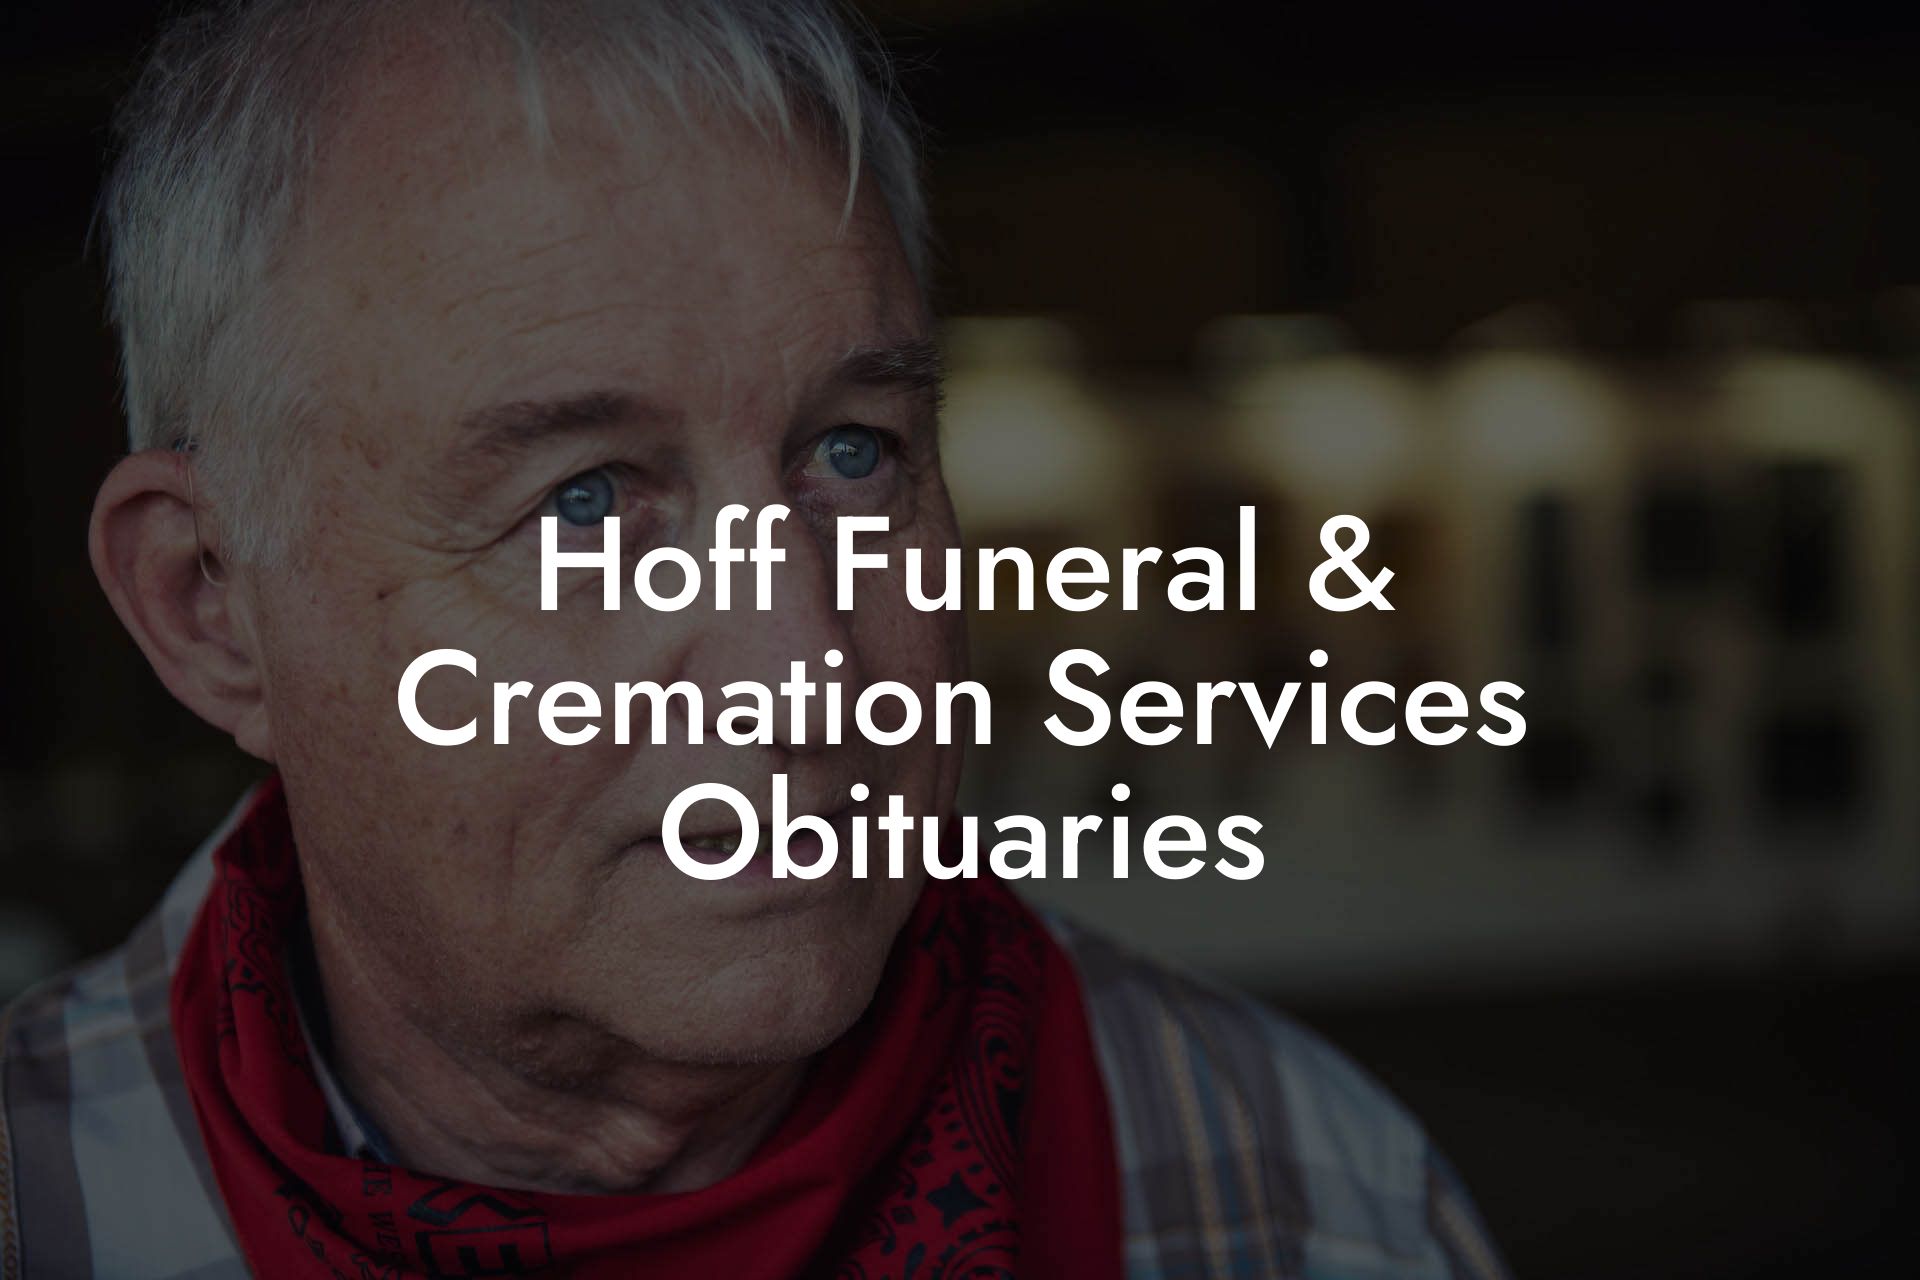 Hoff Funeral & Cremation Services Obituaries - Eulogy Assistant